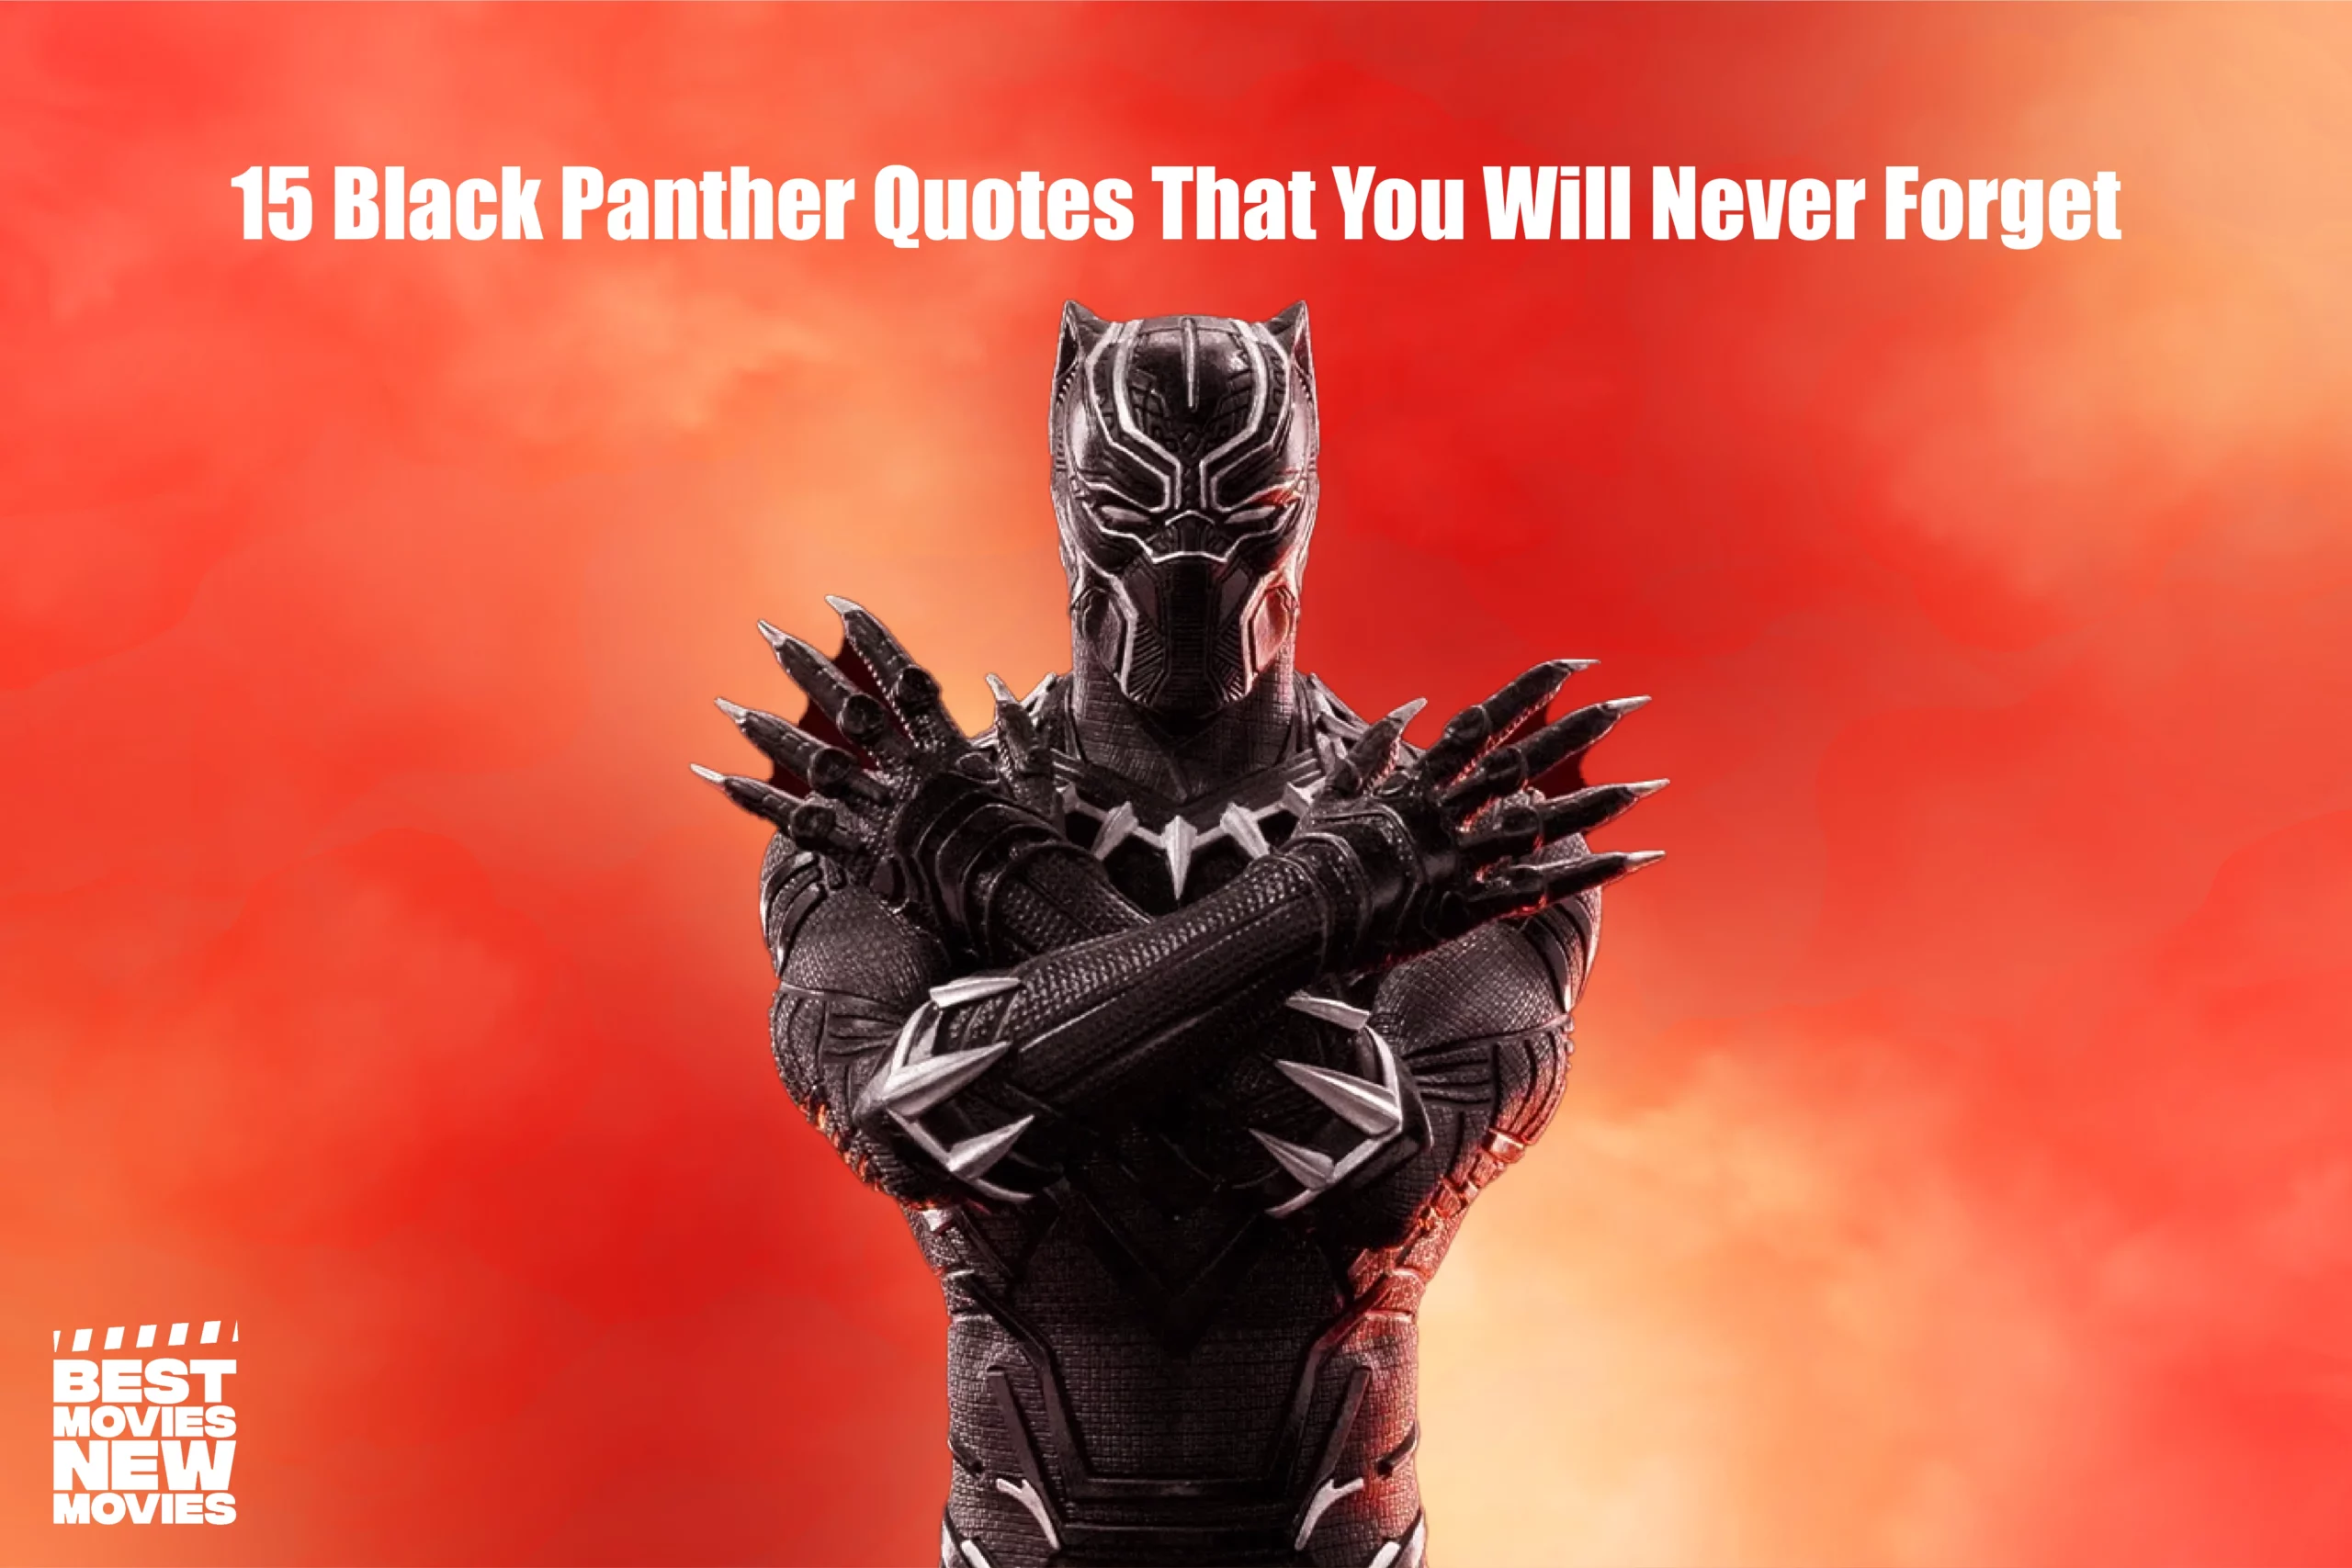 15 Black Panther Quotes That You Will Never Forget